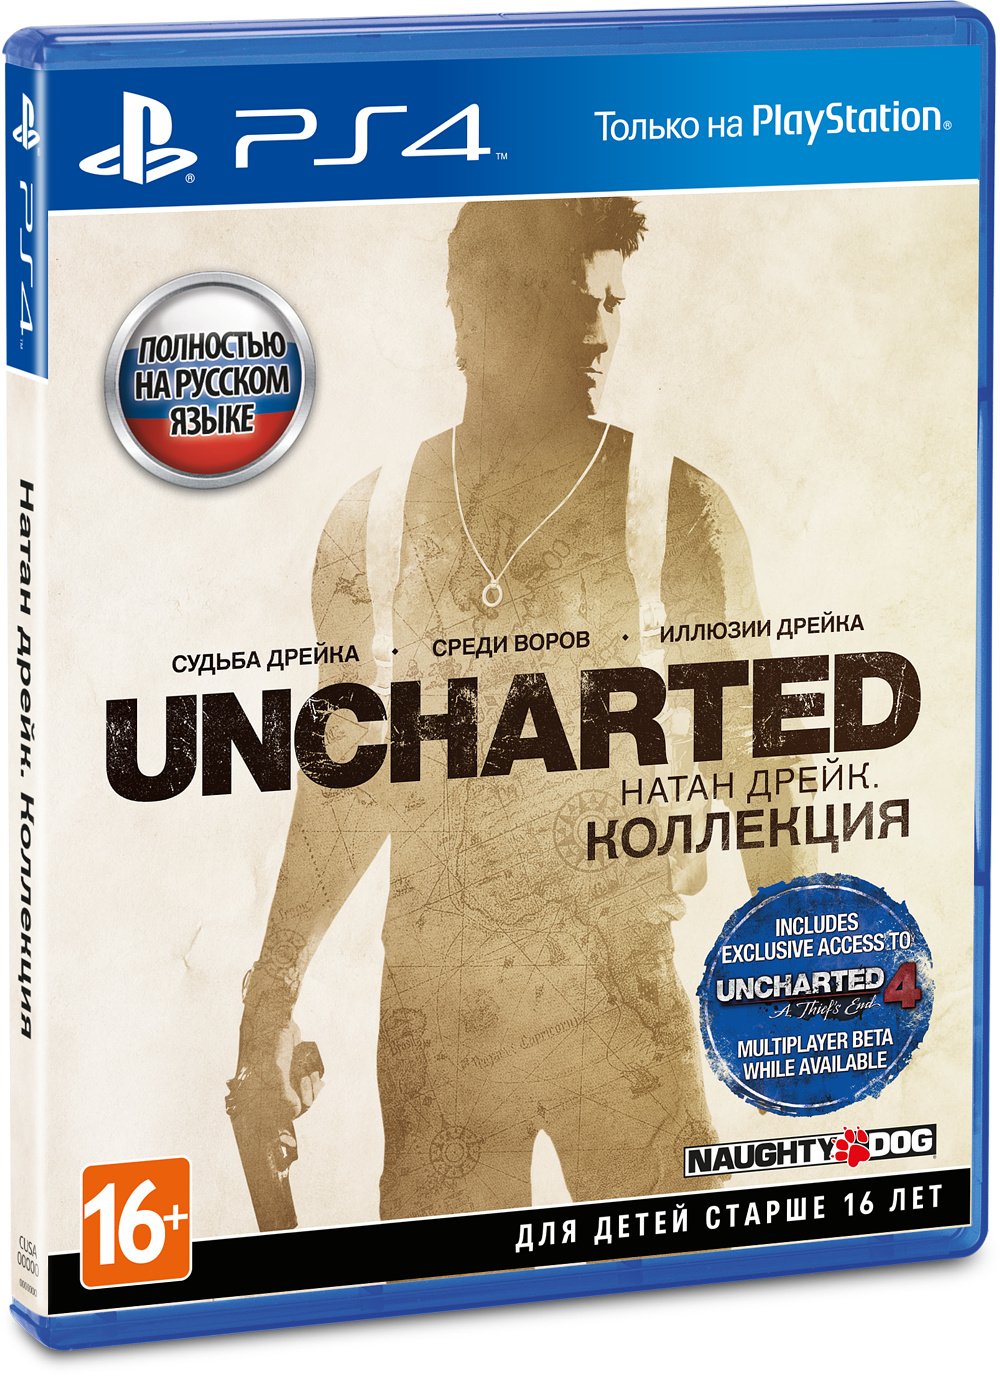 Playstation collections. Uncharted collection ps4 диск.